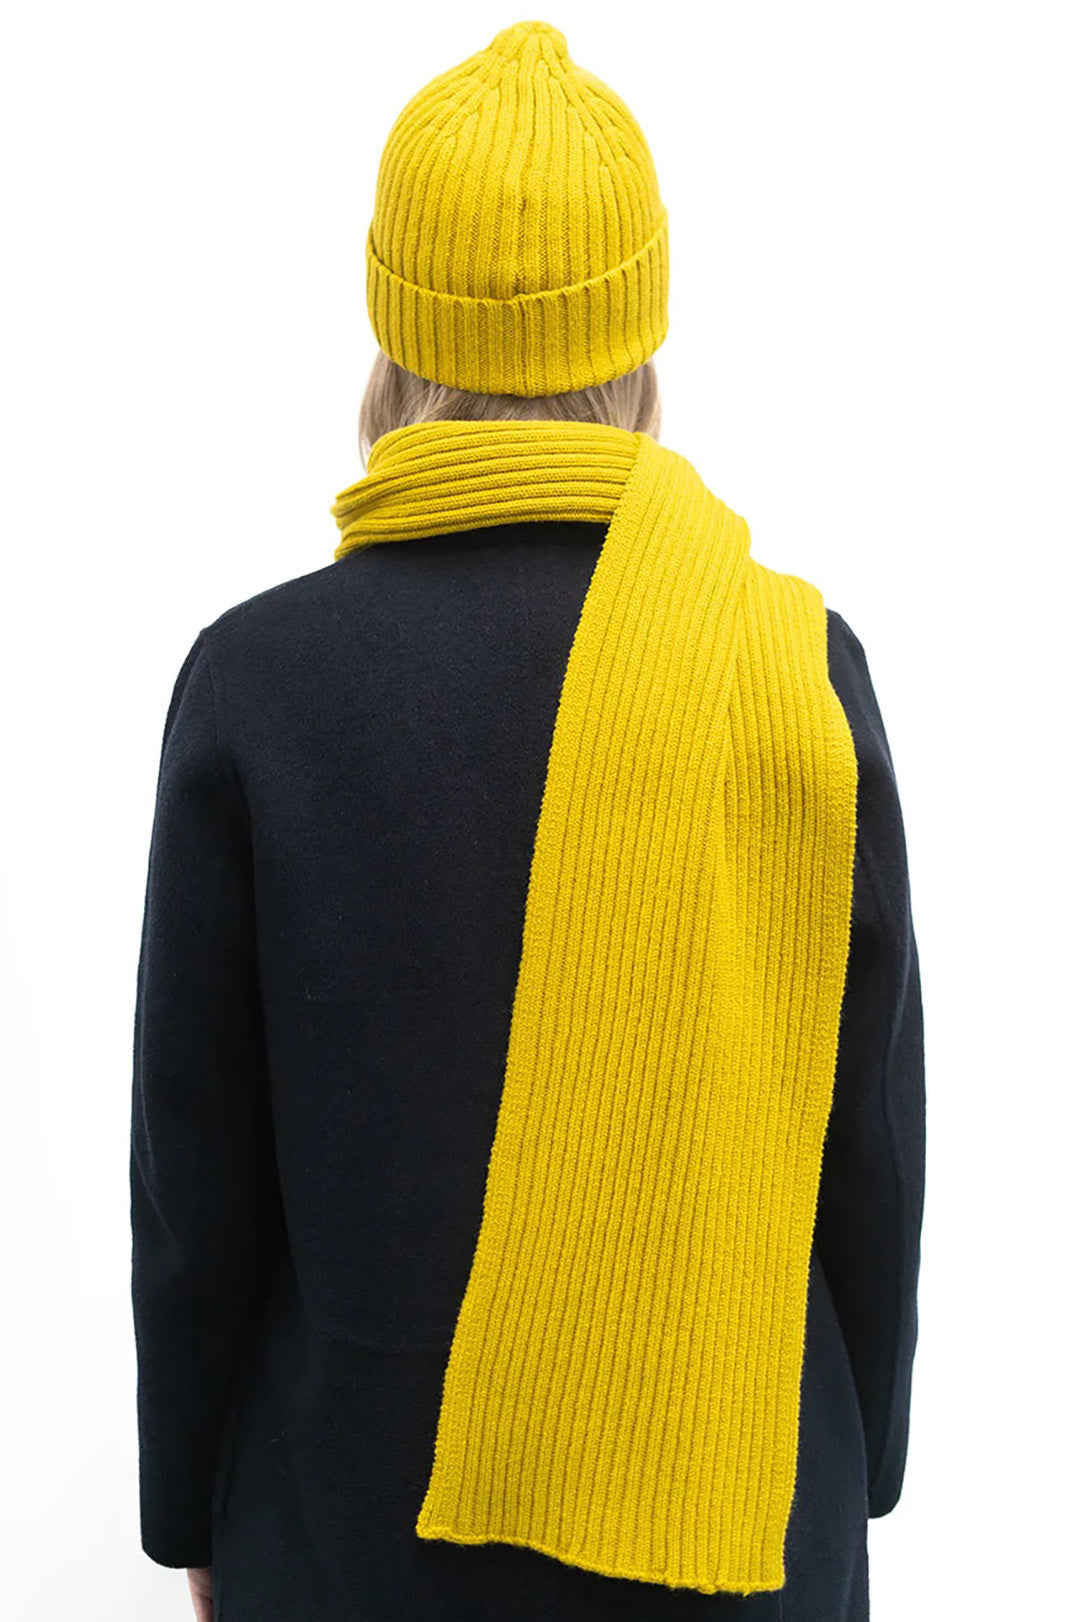 This scarf is a timeless classic with a ribbed knit structure in a bright mustard yellow. Made from the finest grade lambswool spun in Kinross, Scotland.